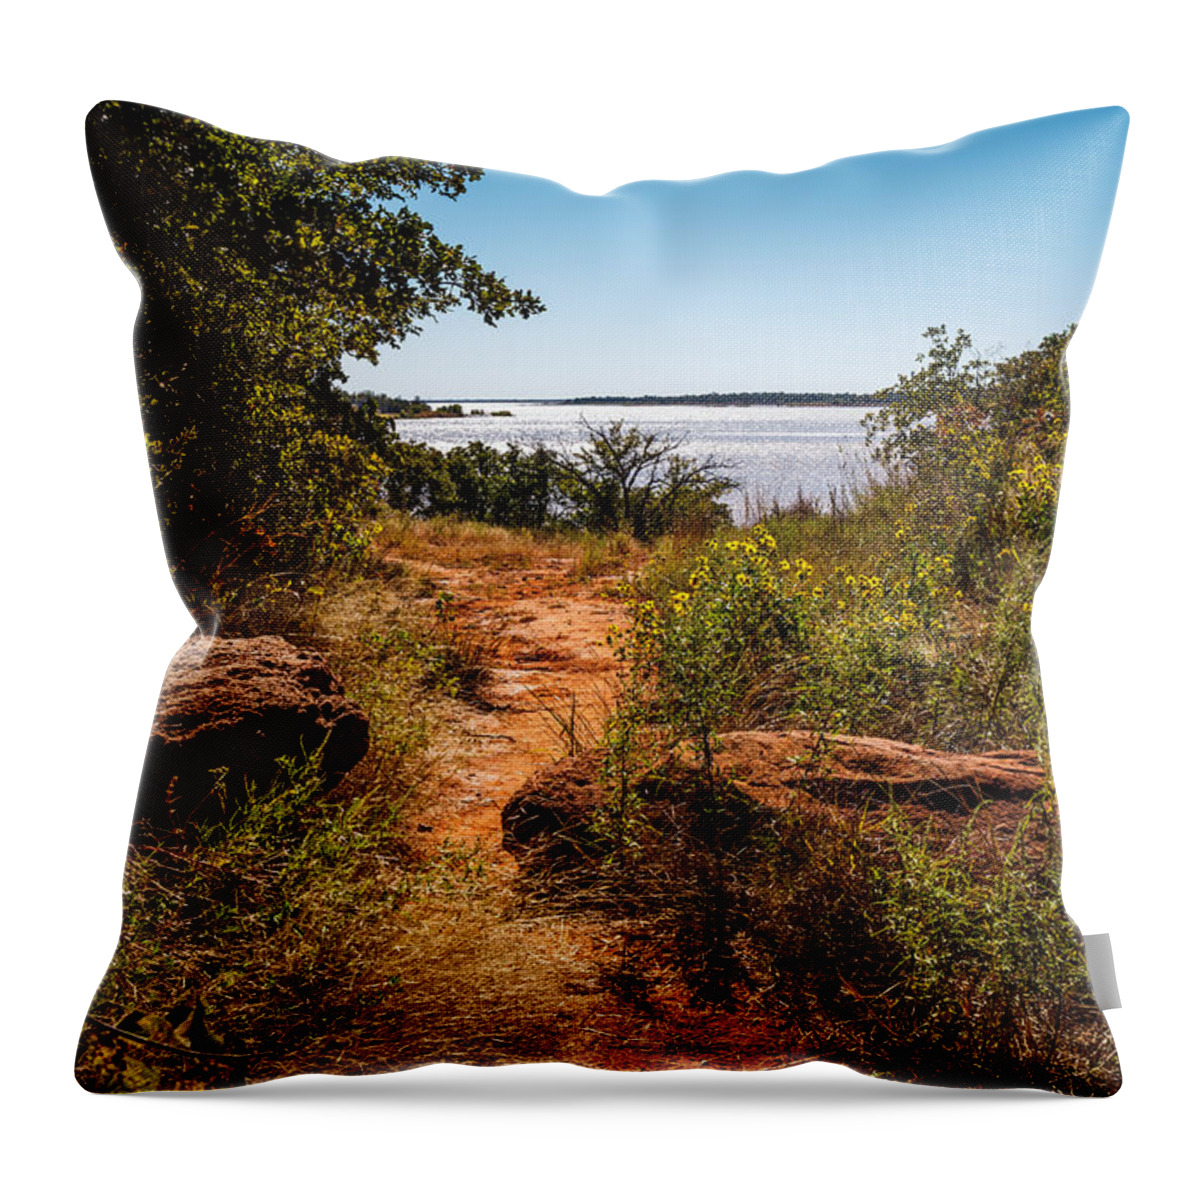 Green Throw Pillow featuring the photograph Follow The Path by Doug Long